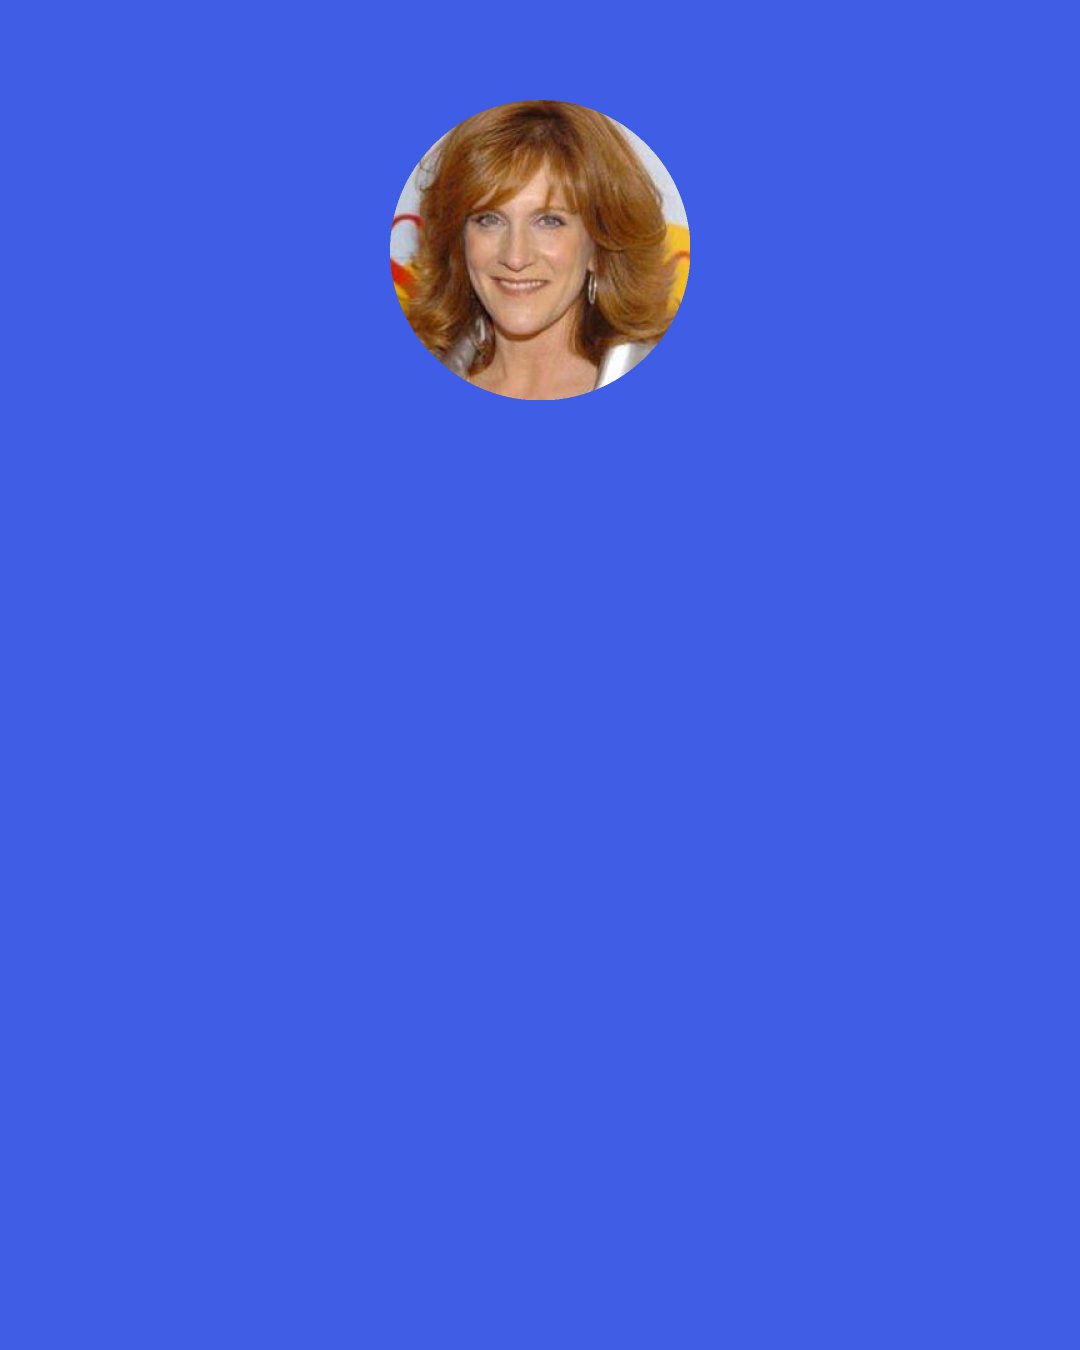 Carol Leifer: Whenever I travel I like to keep the seat next to me empty. I found a great way to do it. When someone walks down the aisle and says to you, "Is someone sitting there?" just say, "No one except the Lord."